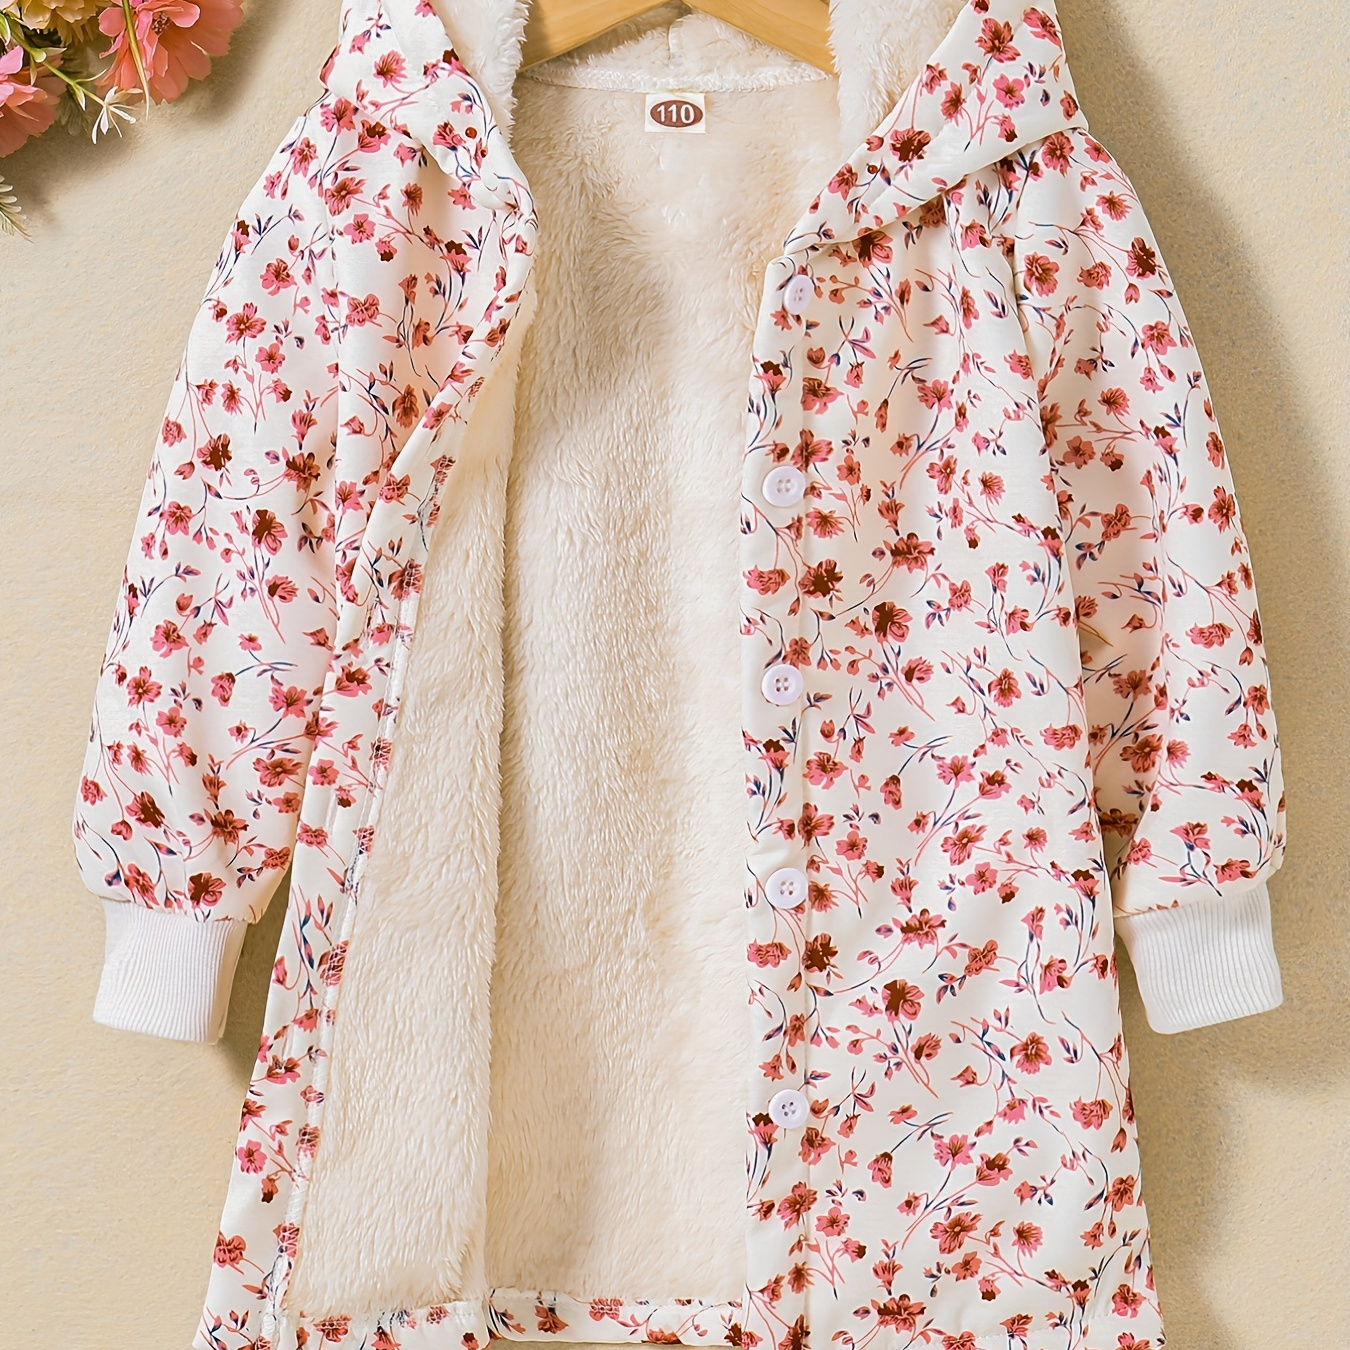 

Girls Winter Coat Plush Fleece Lined Button-up Hooded Jacket Overcoat With Flowers Print For Going Out